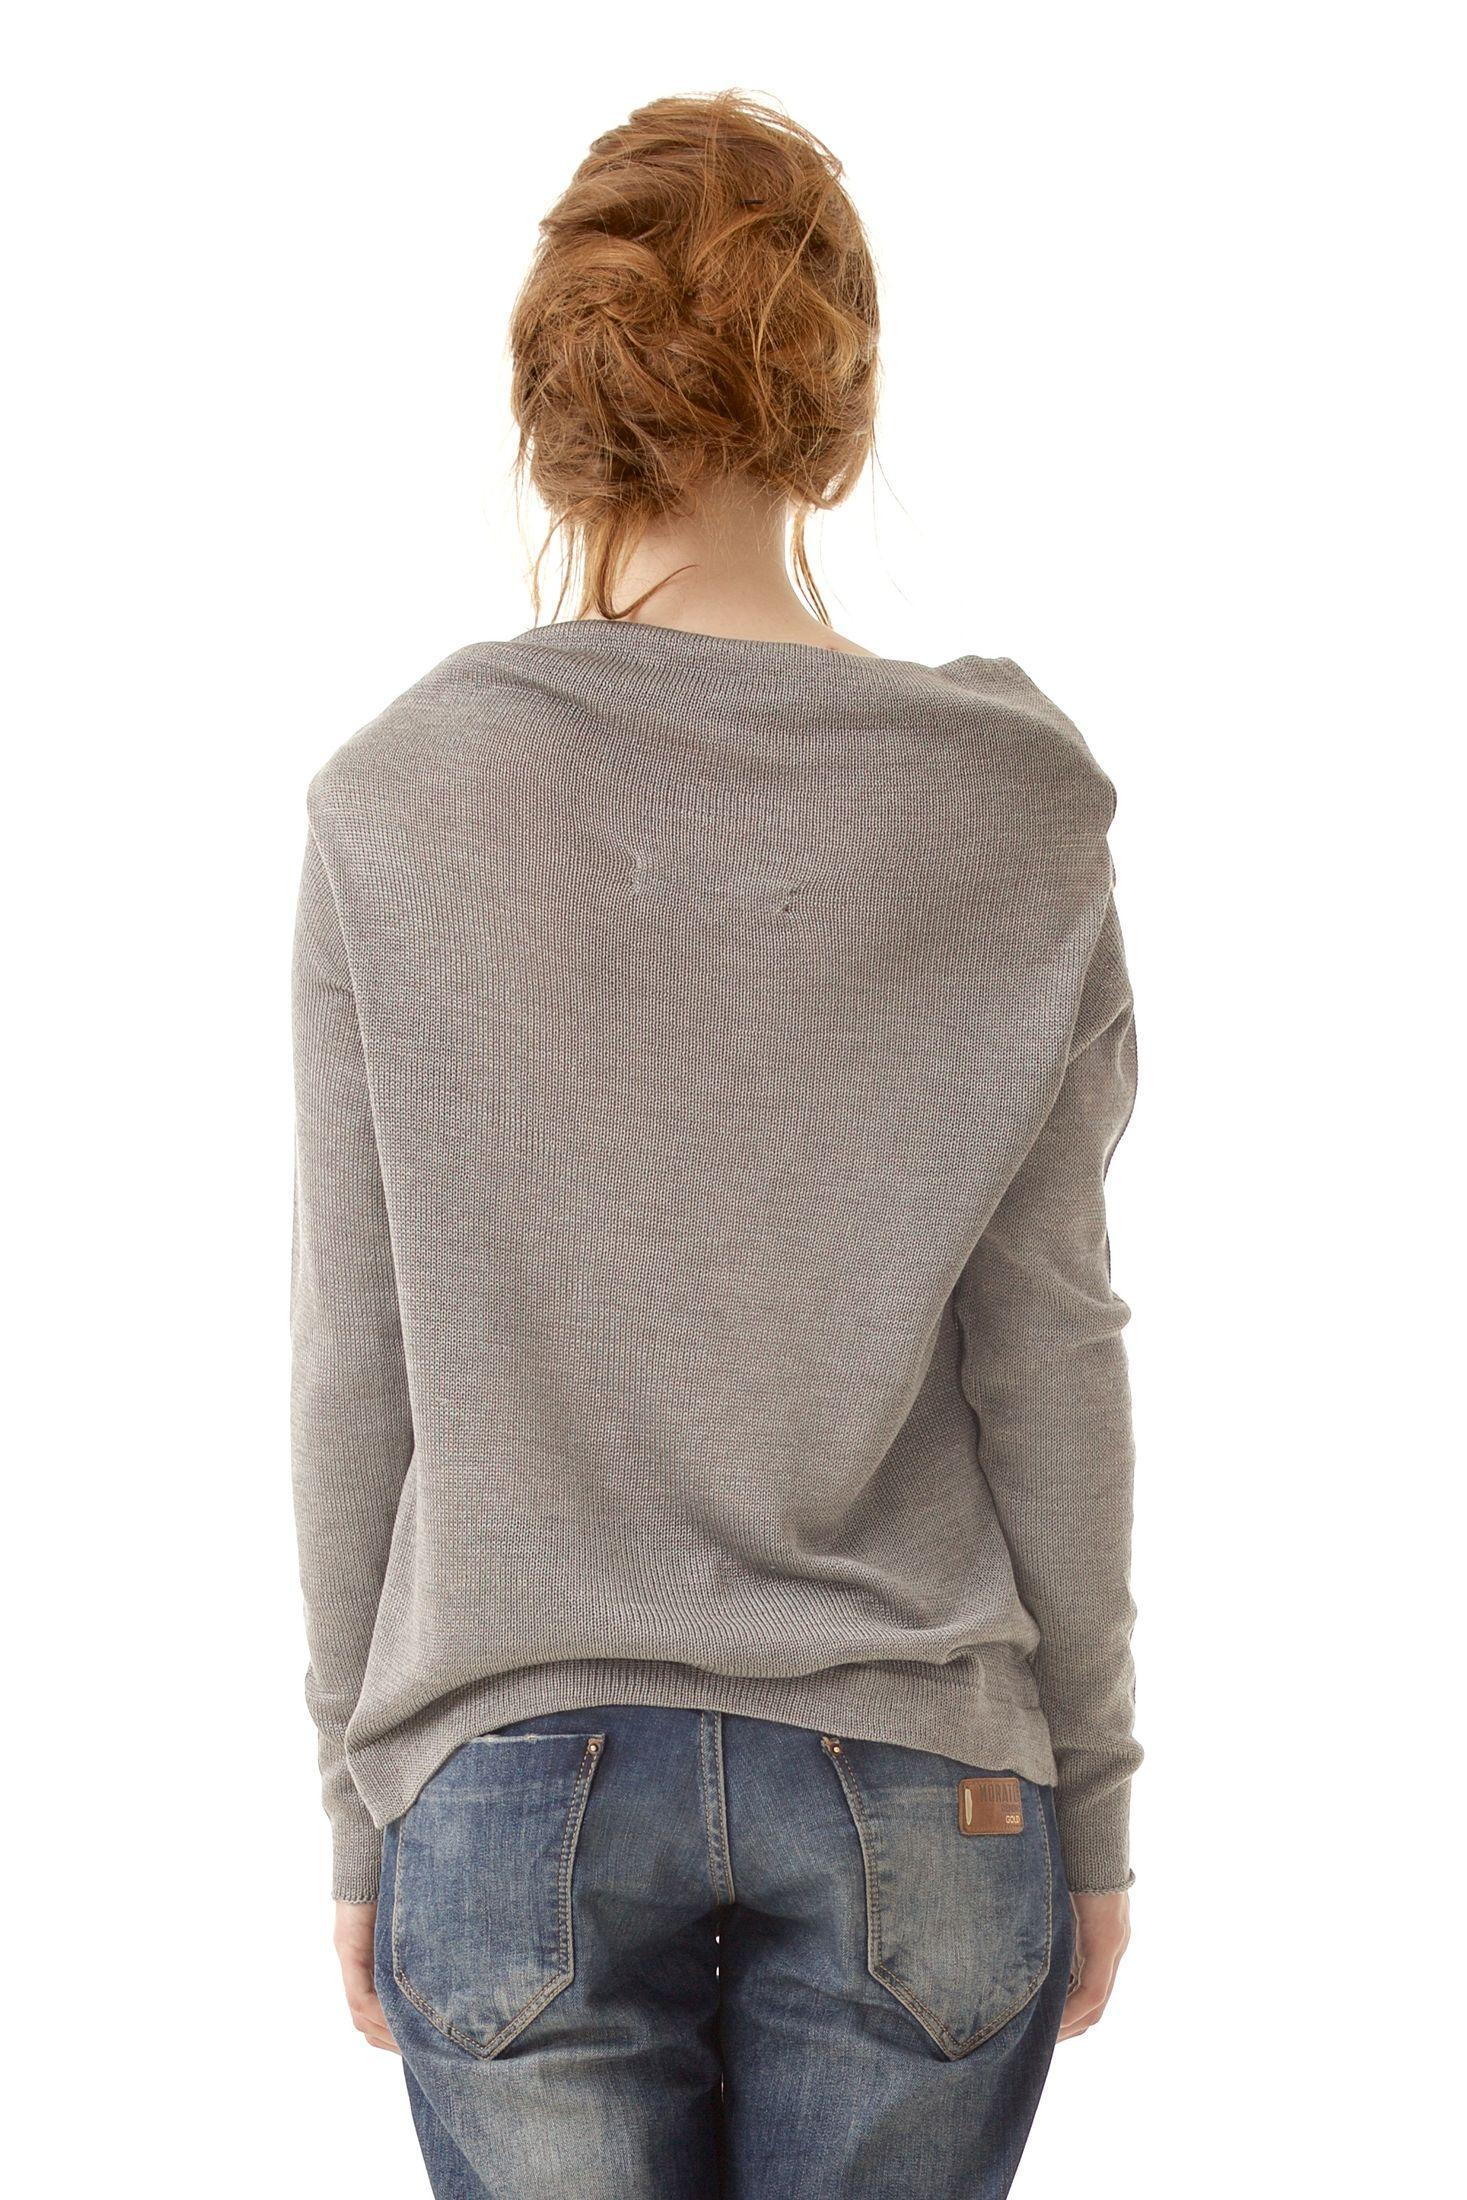 Discover the allure of AGNES, Krista Elsta's renowned off-the-shoulder grey sweater, meticulously made from 100% Italian cashmere. The cowl collar and relaxed fit exude timeless elegance for every occasion.